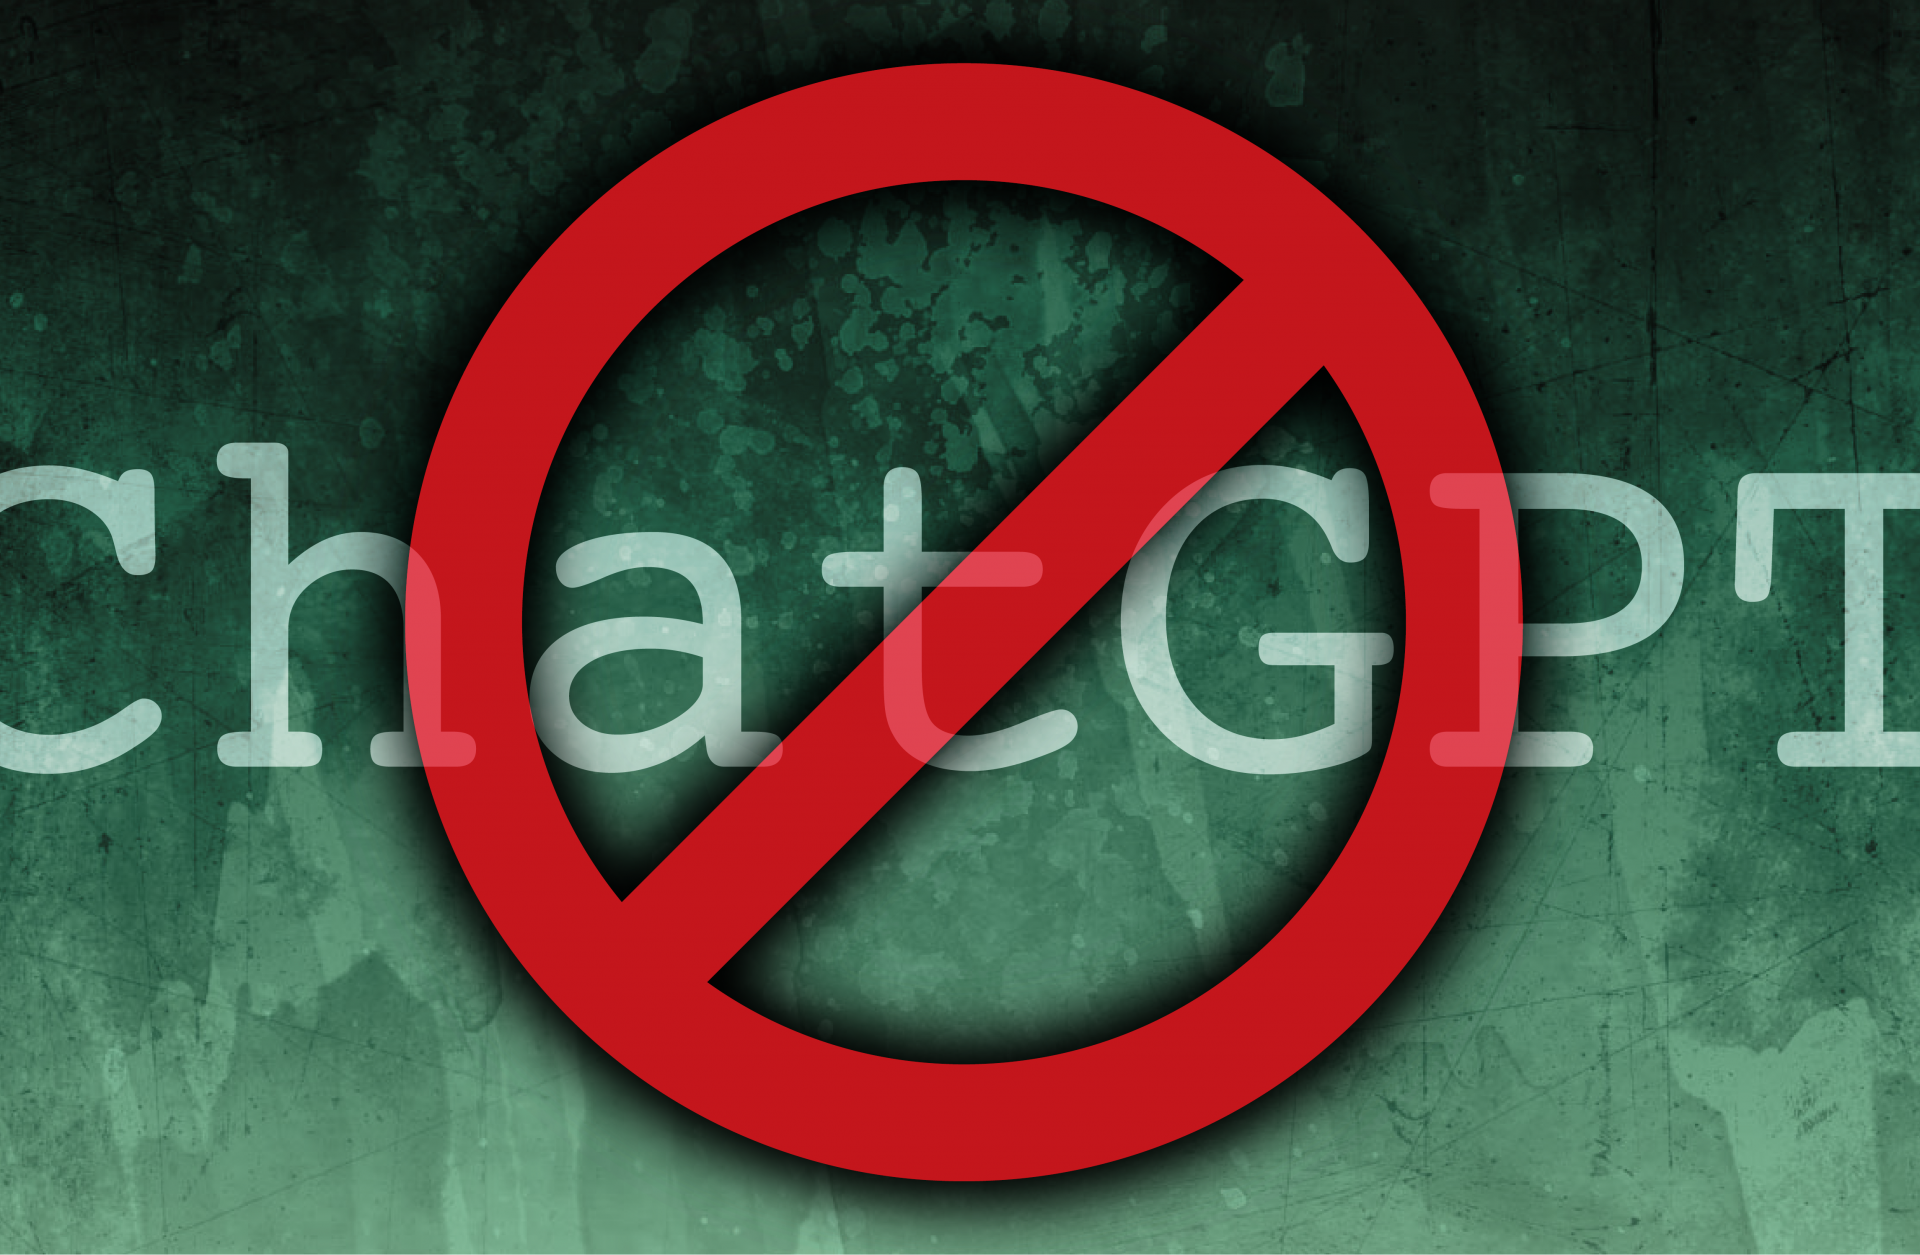 A red prohibition sign is superimposed over the word "ChatGPT" against a green background.